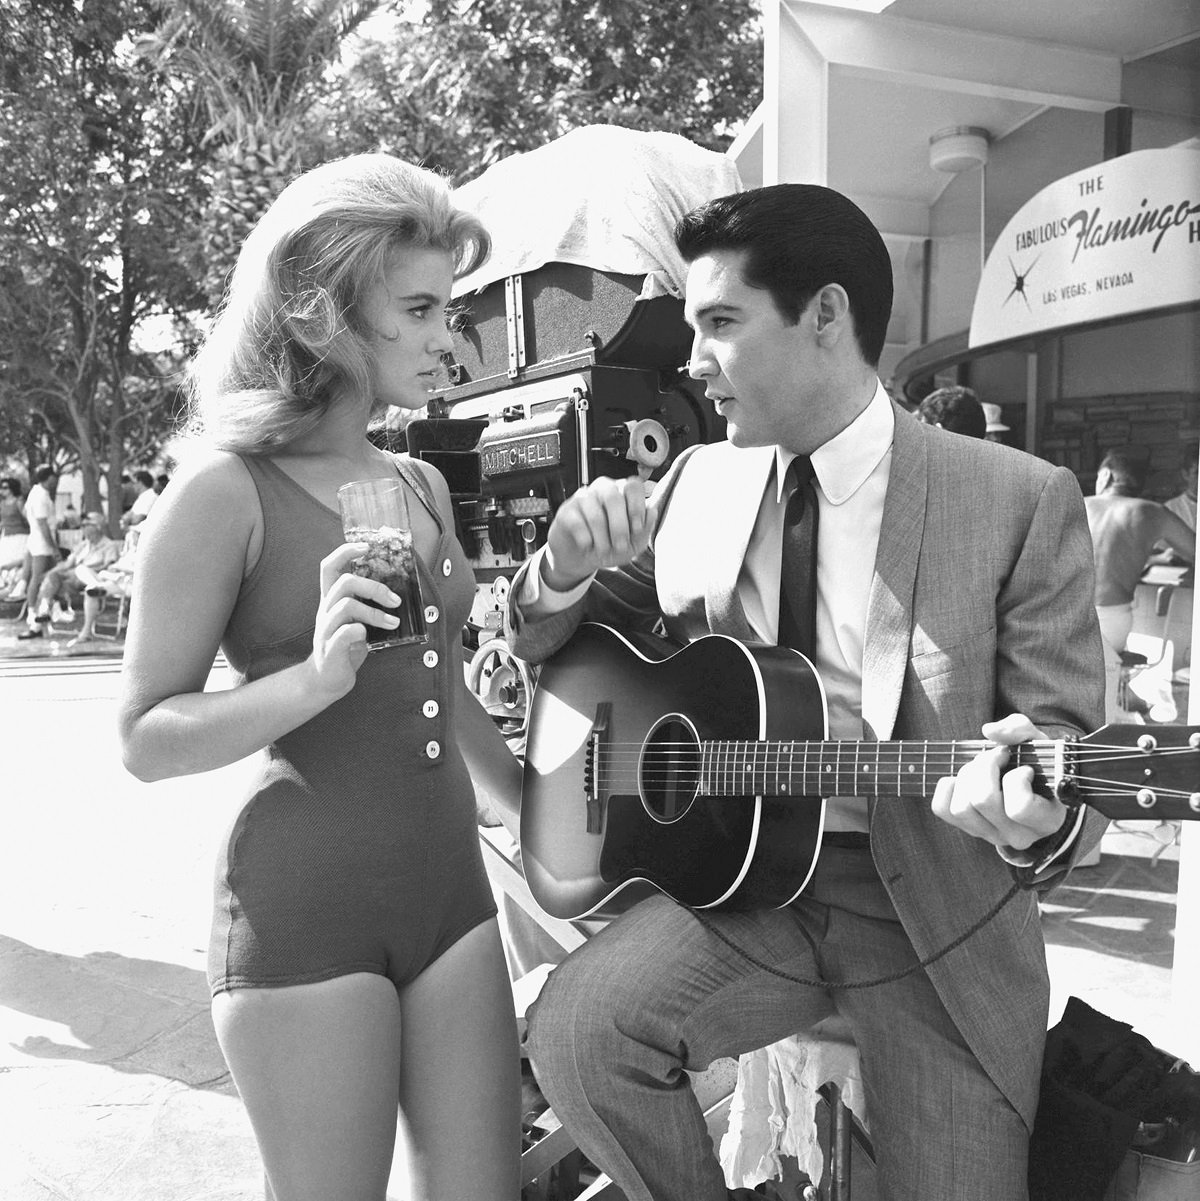 Ann-Margret in a bathing suit and Elvis Presley in a suit playing the guitar as their characters in 'Viva Las Vegas'